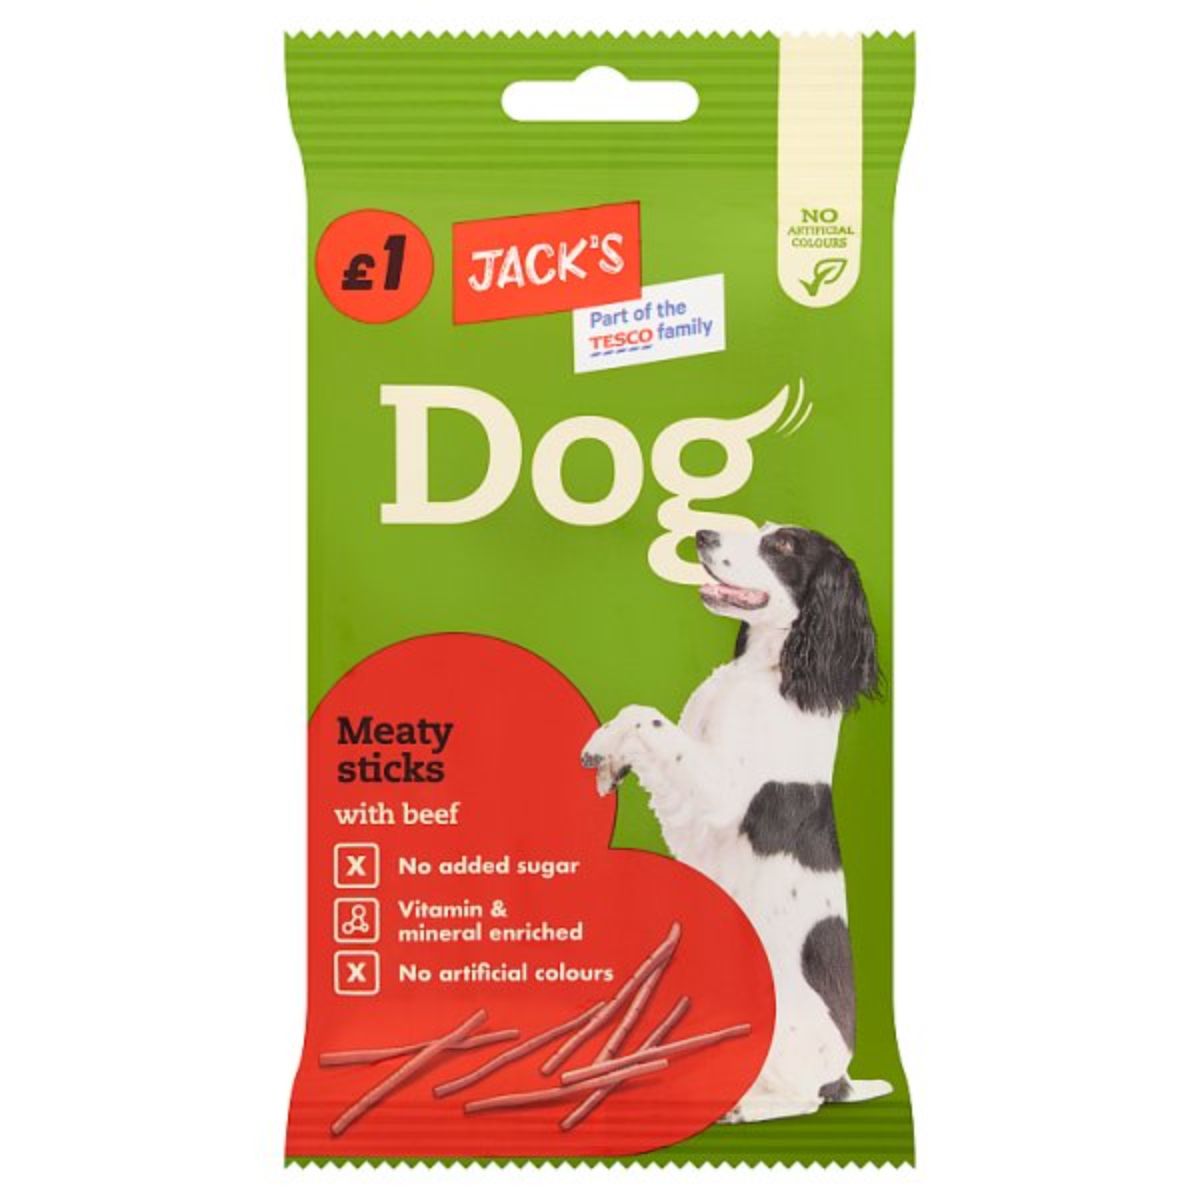 Jack's dog meaty sticks with beef in a package.